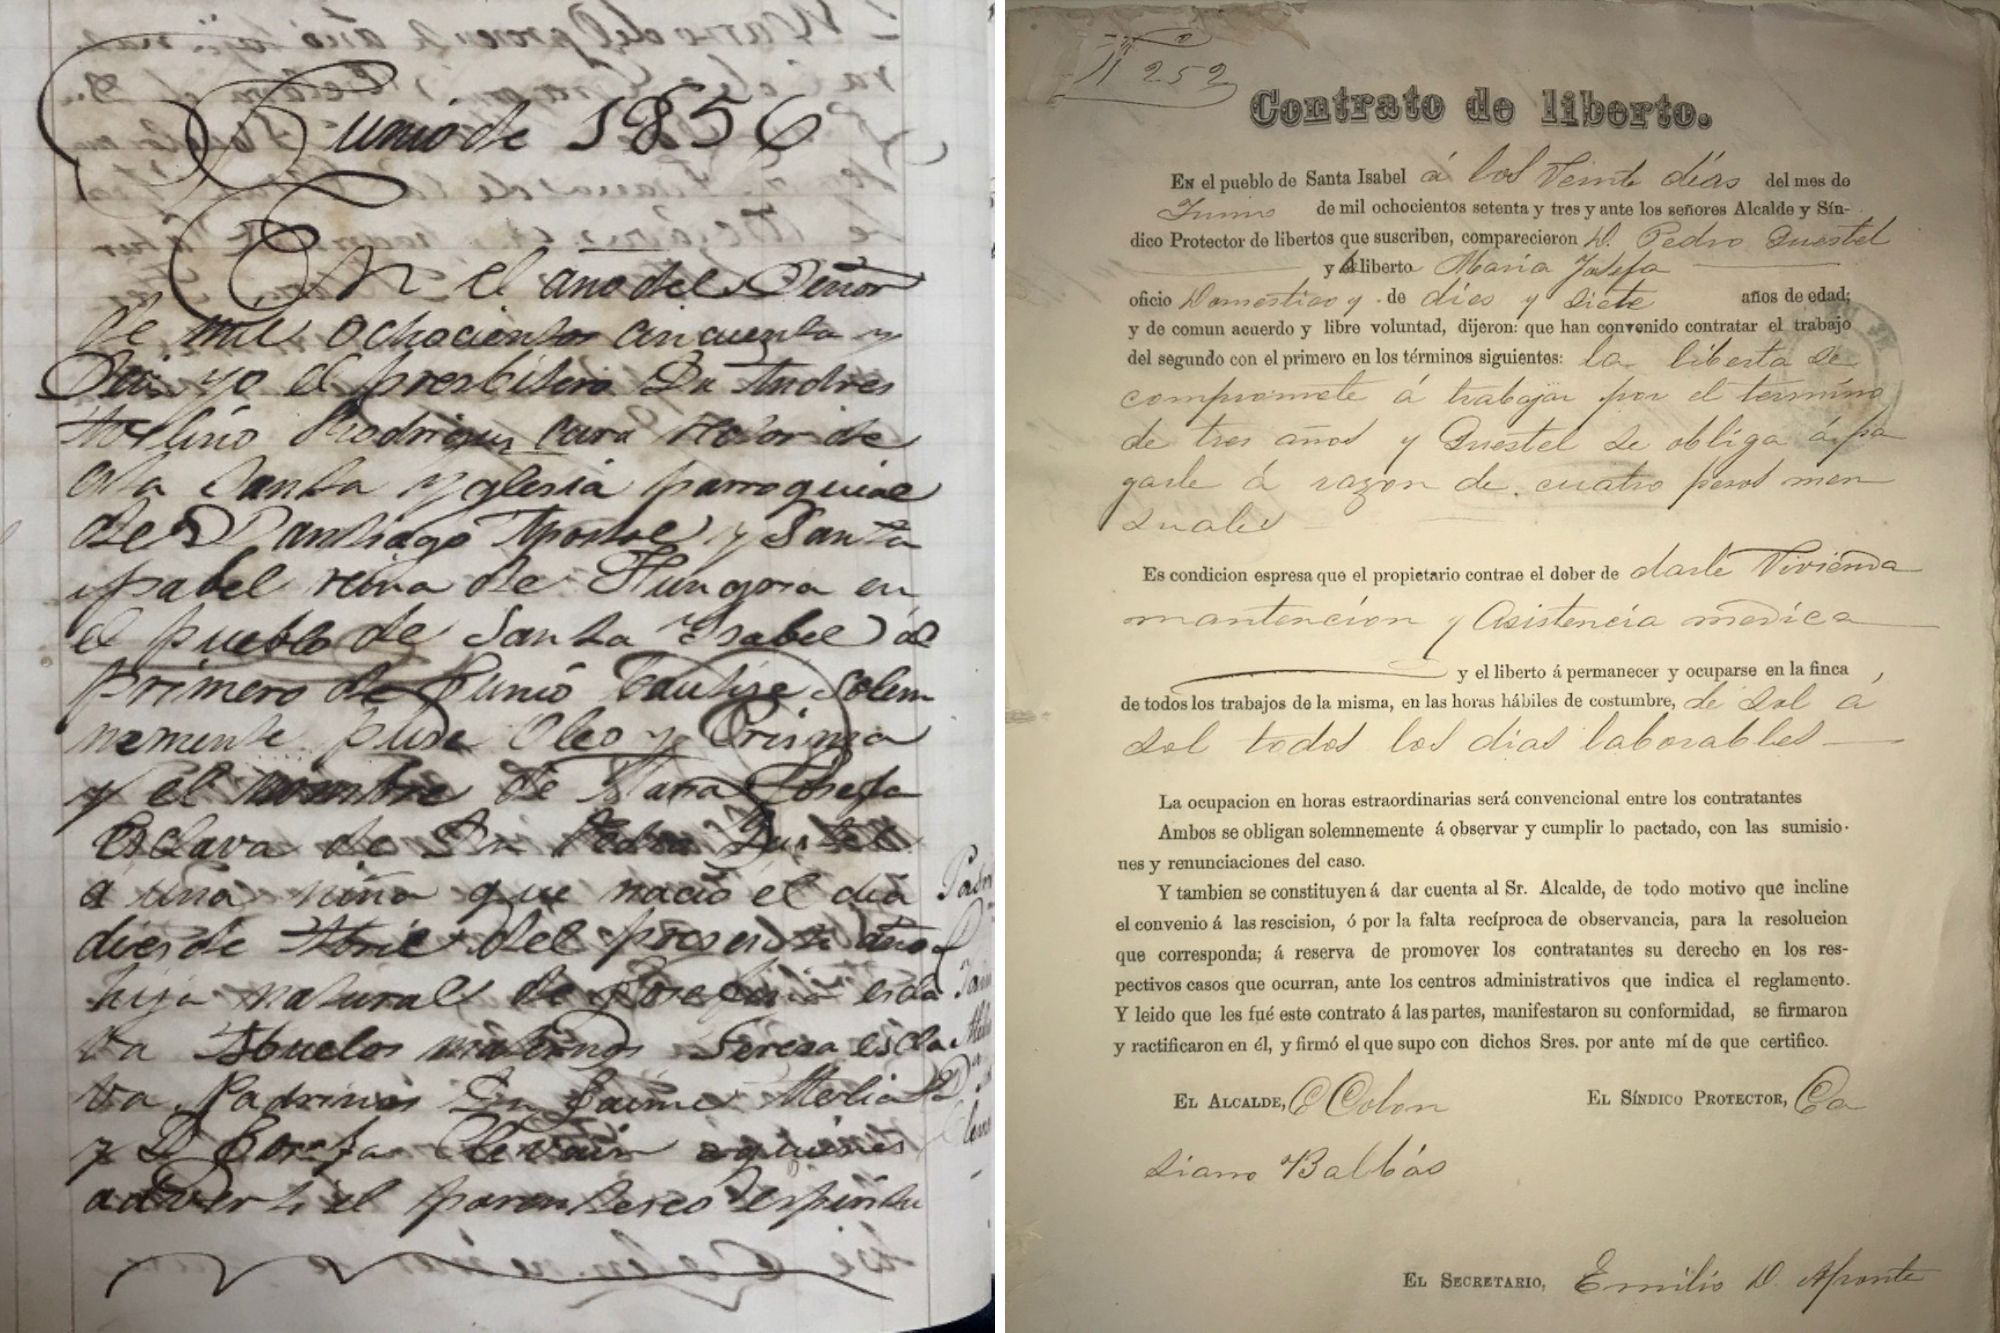 A birth certificate is seen on the left, and a labor contract is seen on the right, dating from the 1800s in Puerto Rico.